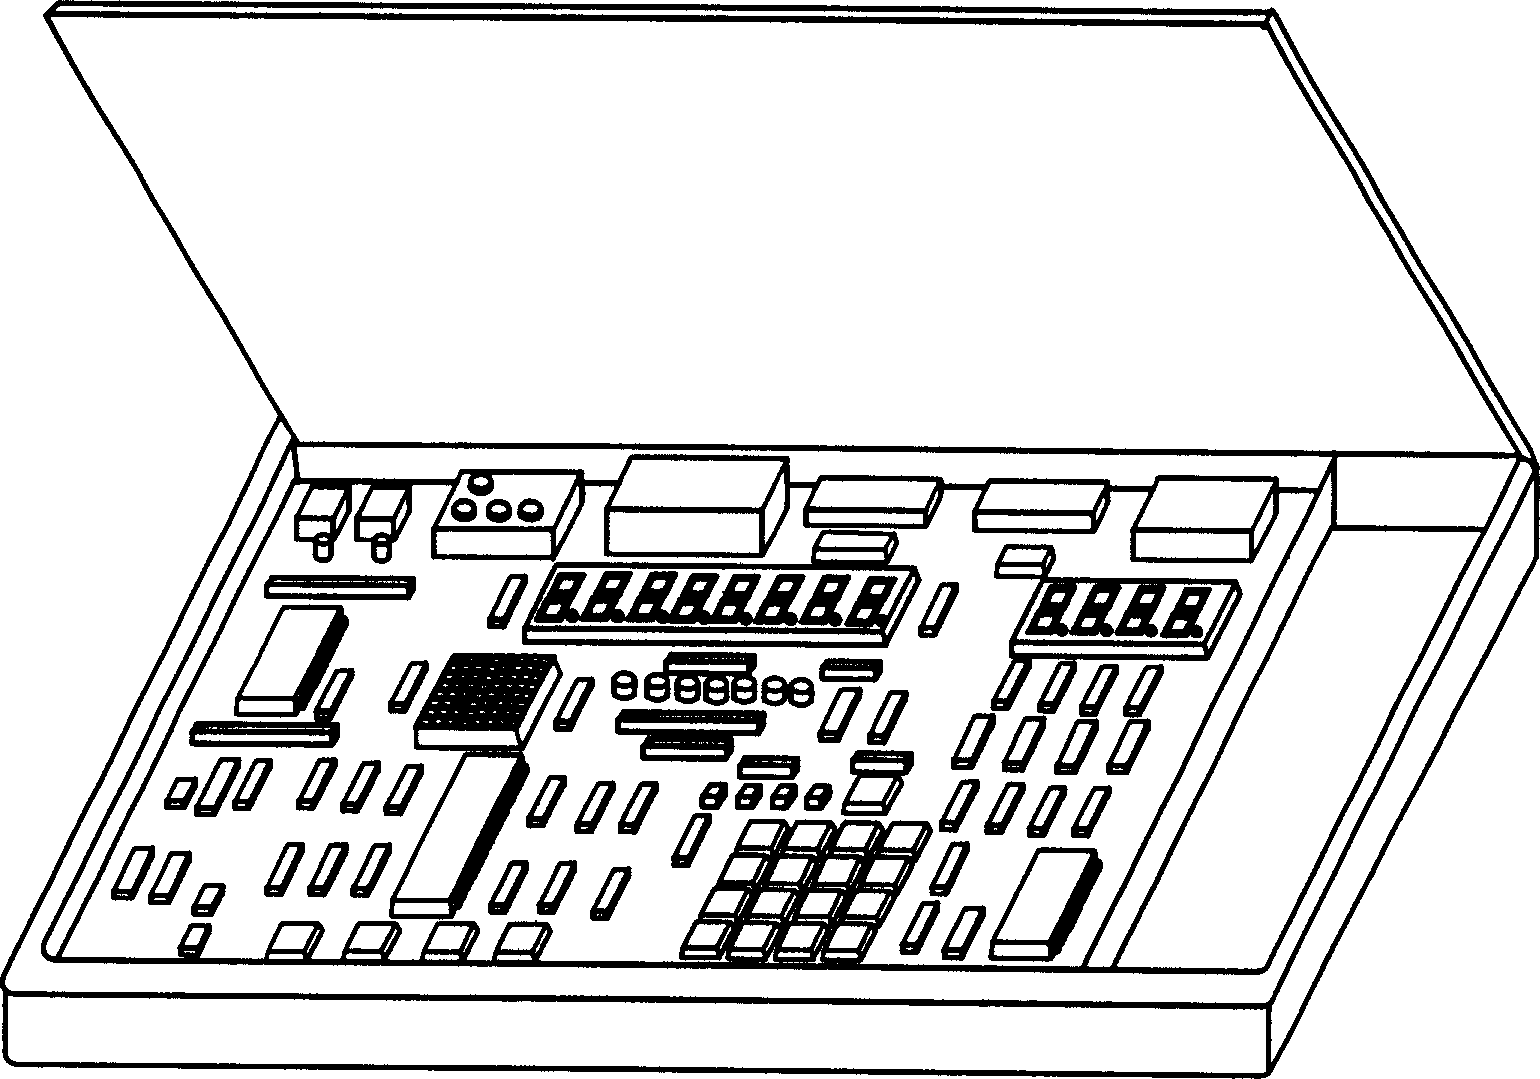 Simulation type one-chip computer experiment instrument